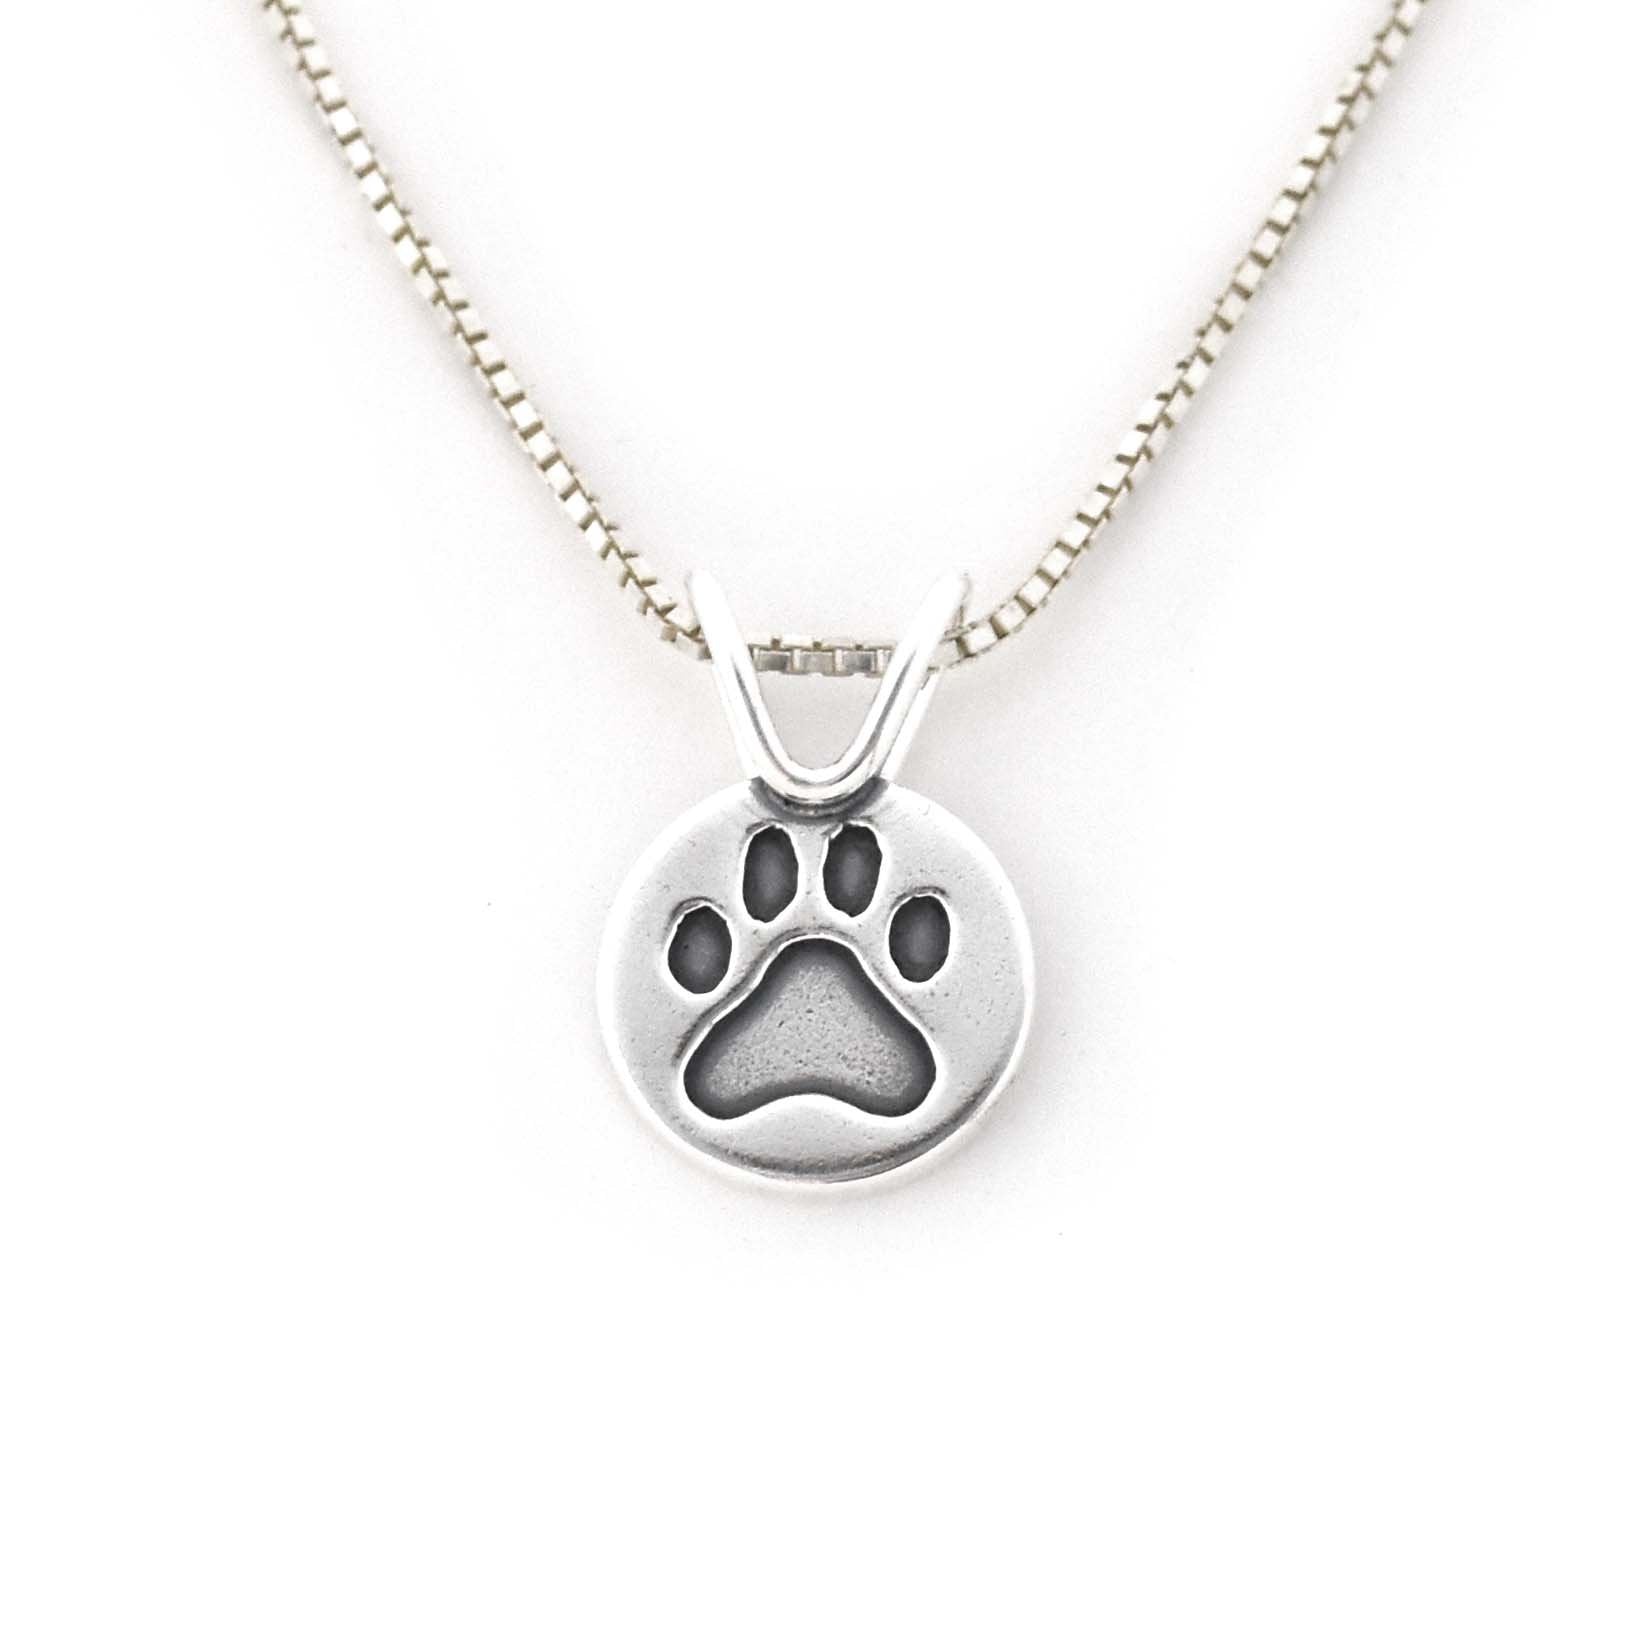 Personalized Silver Paw Print Necklace - Etsy